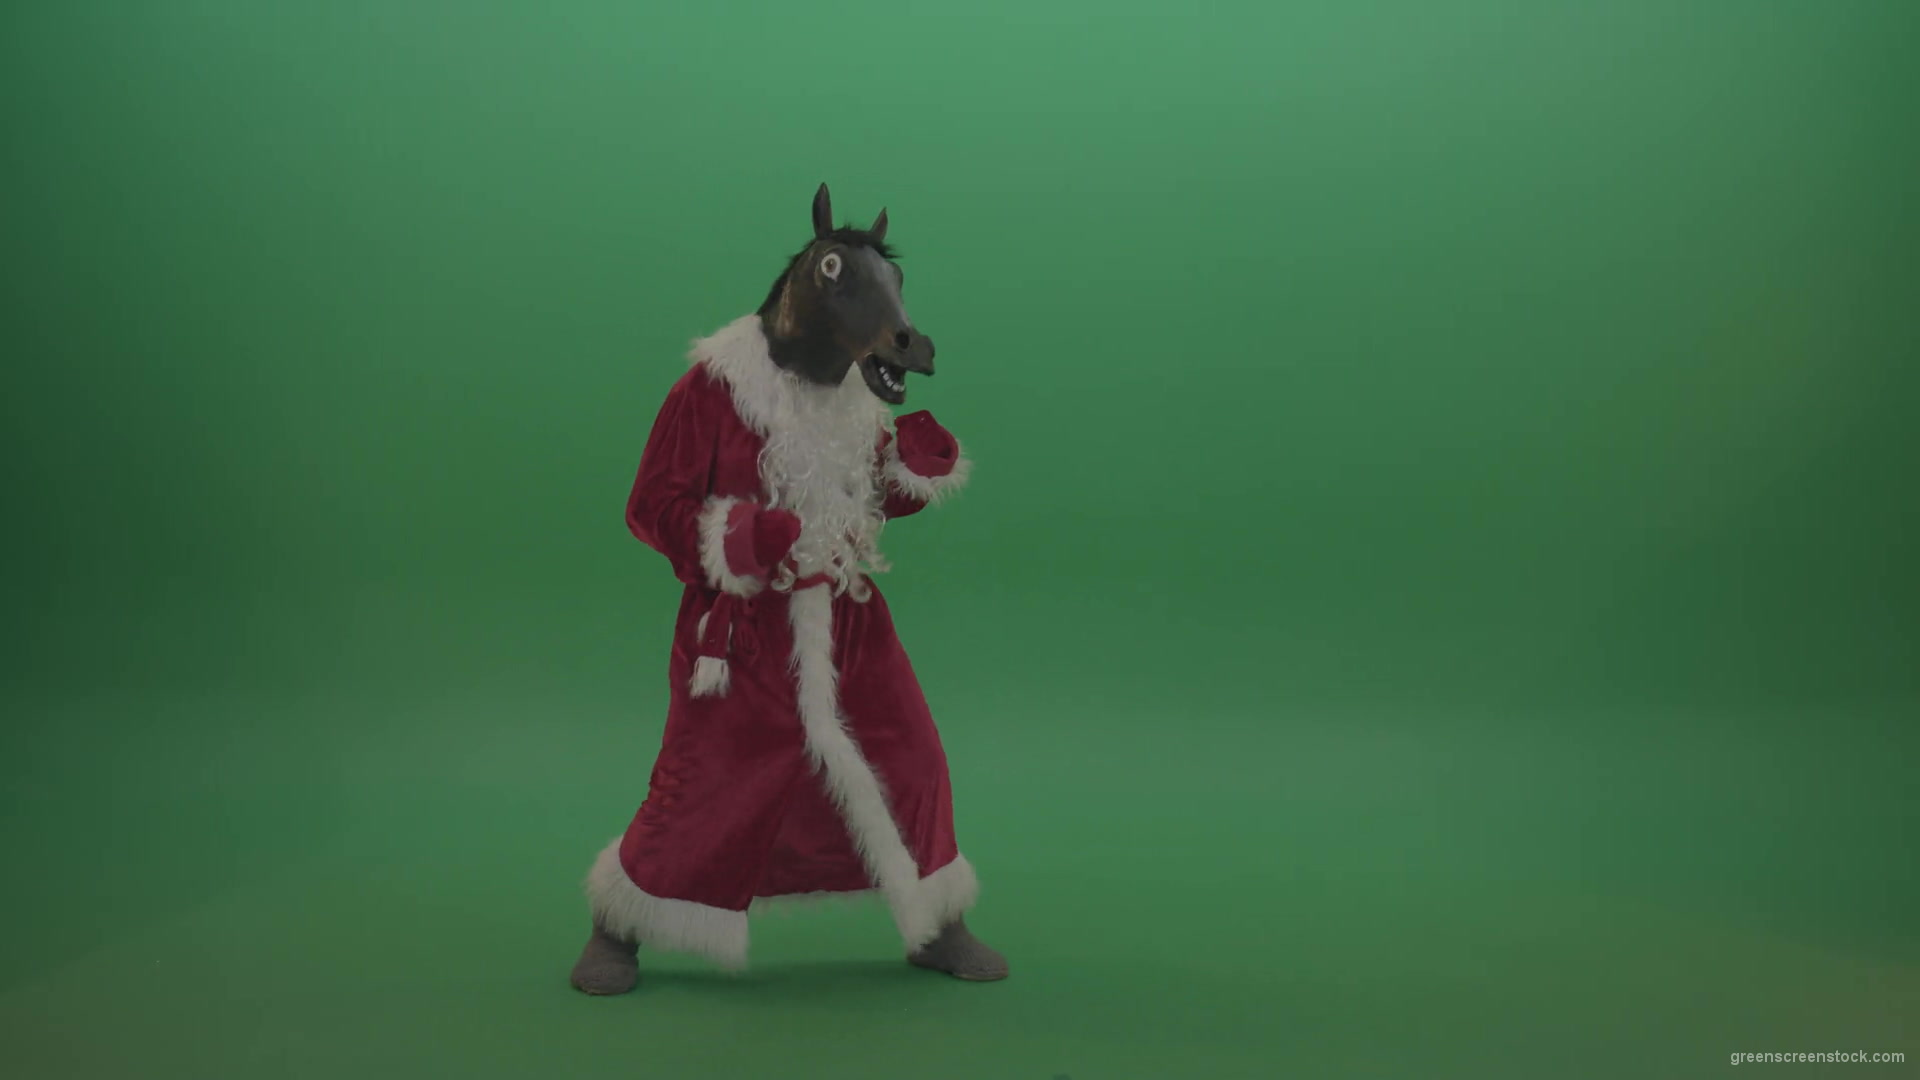 Horse-head-santa-displays-his-fight-techniques-over-chromakey-background-1920_005 Green Screen Stock